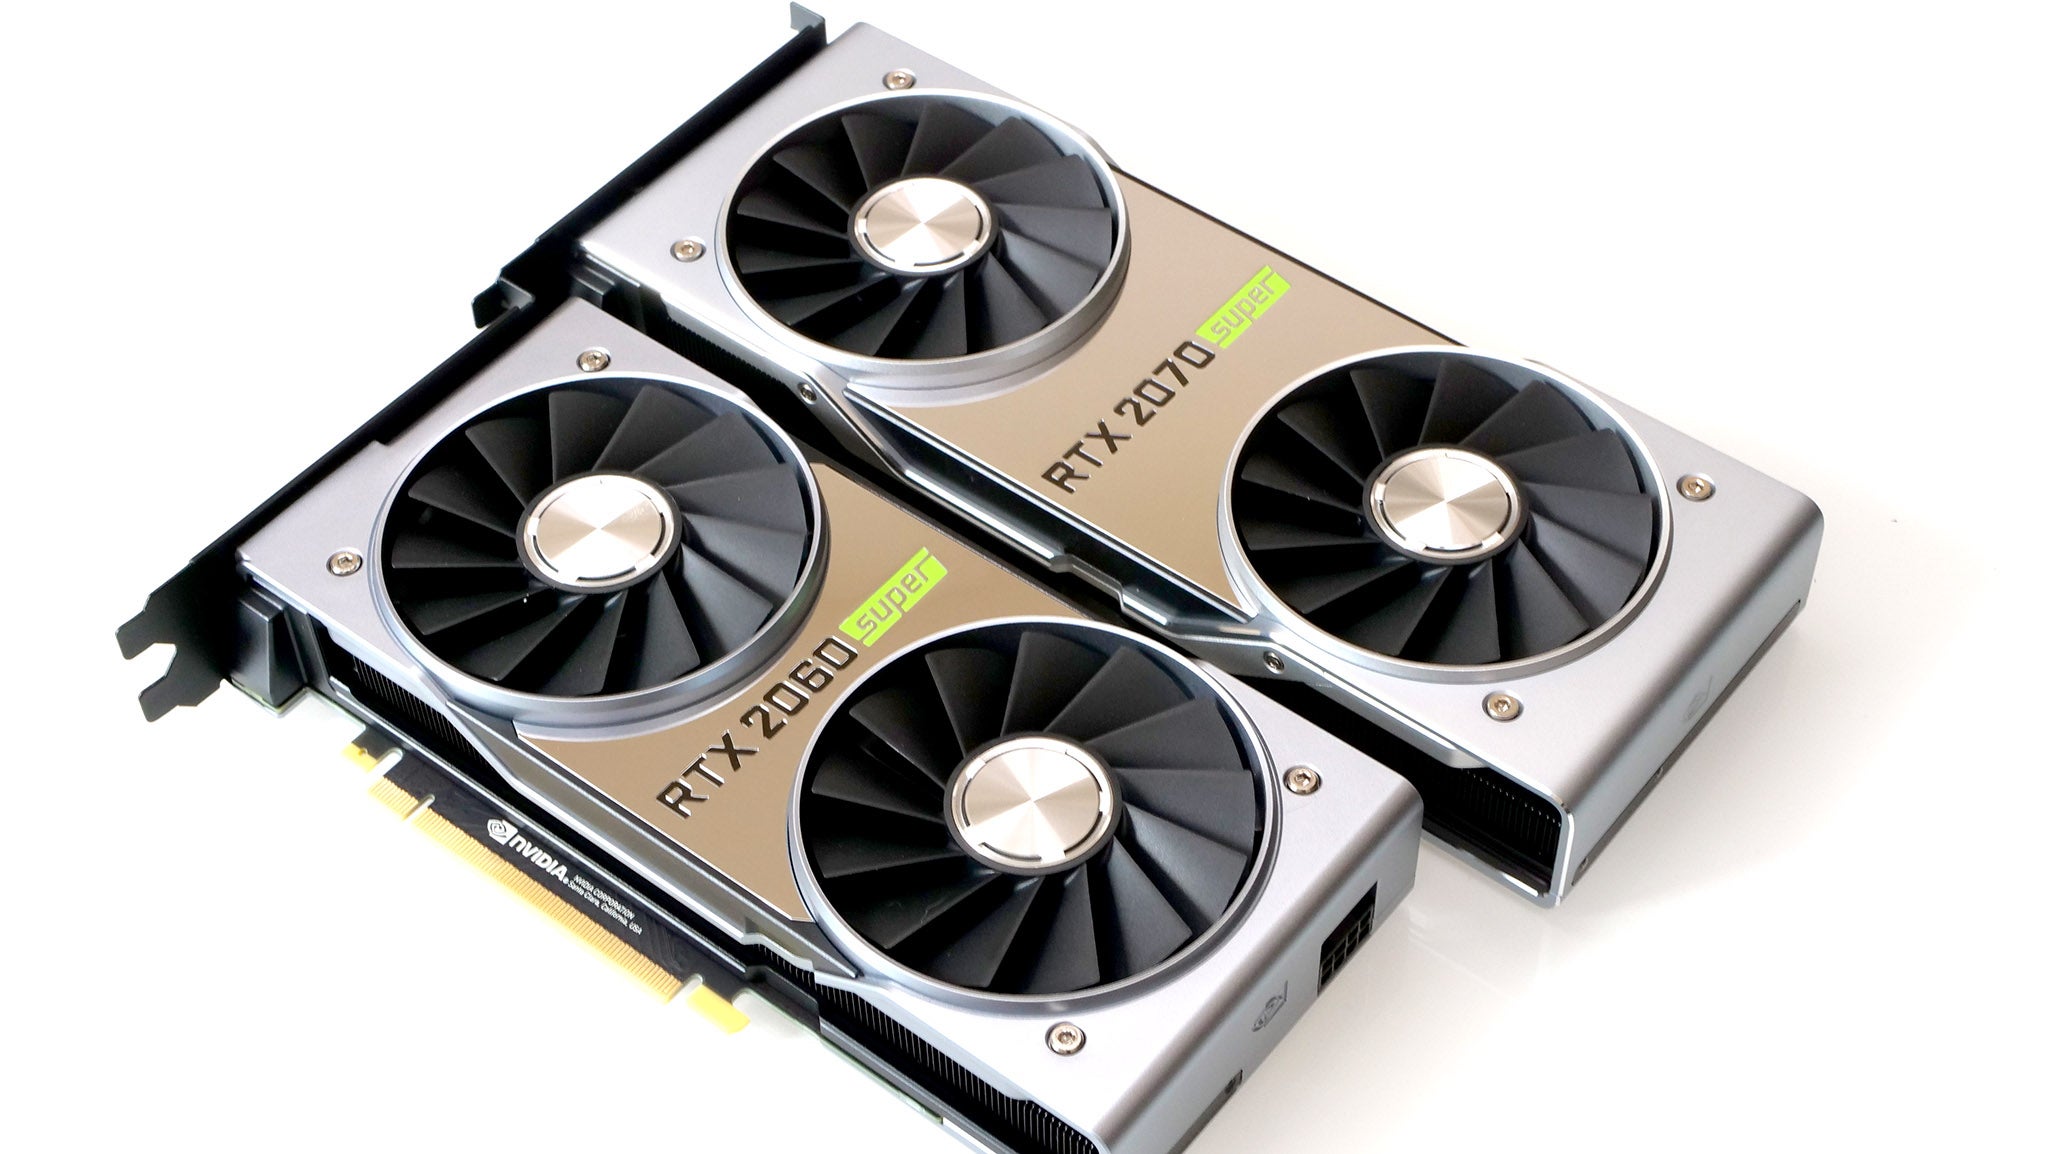 Nvidia GeForce RTX 2060 Super / RTX 2070 Super review: timely